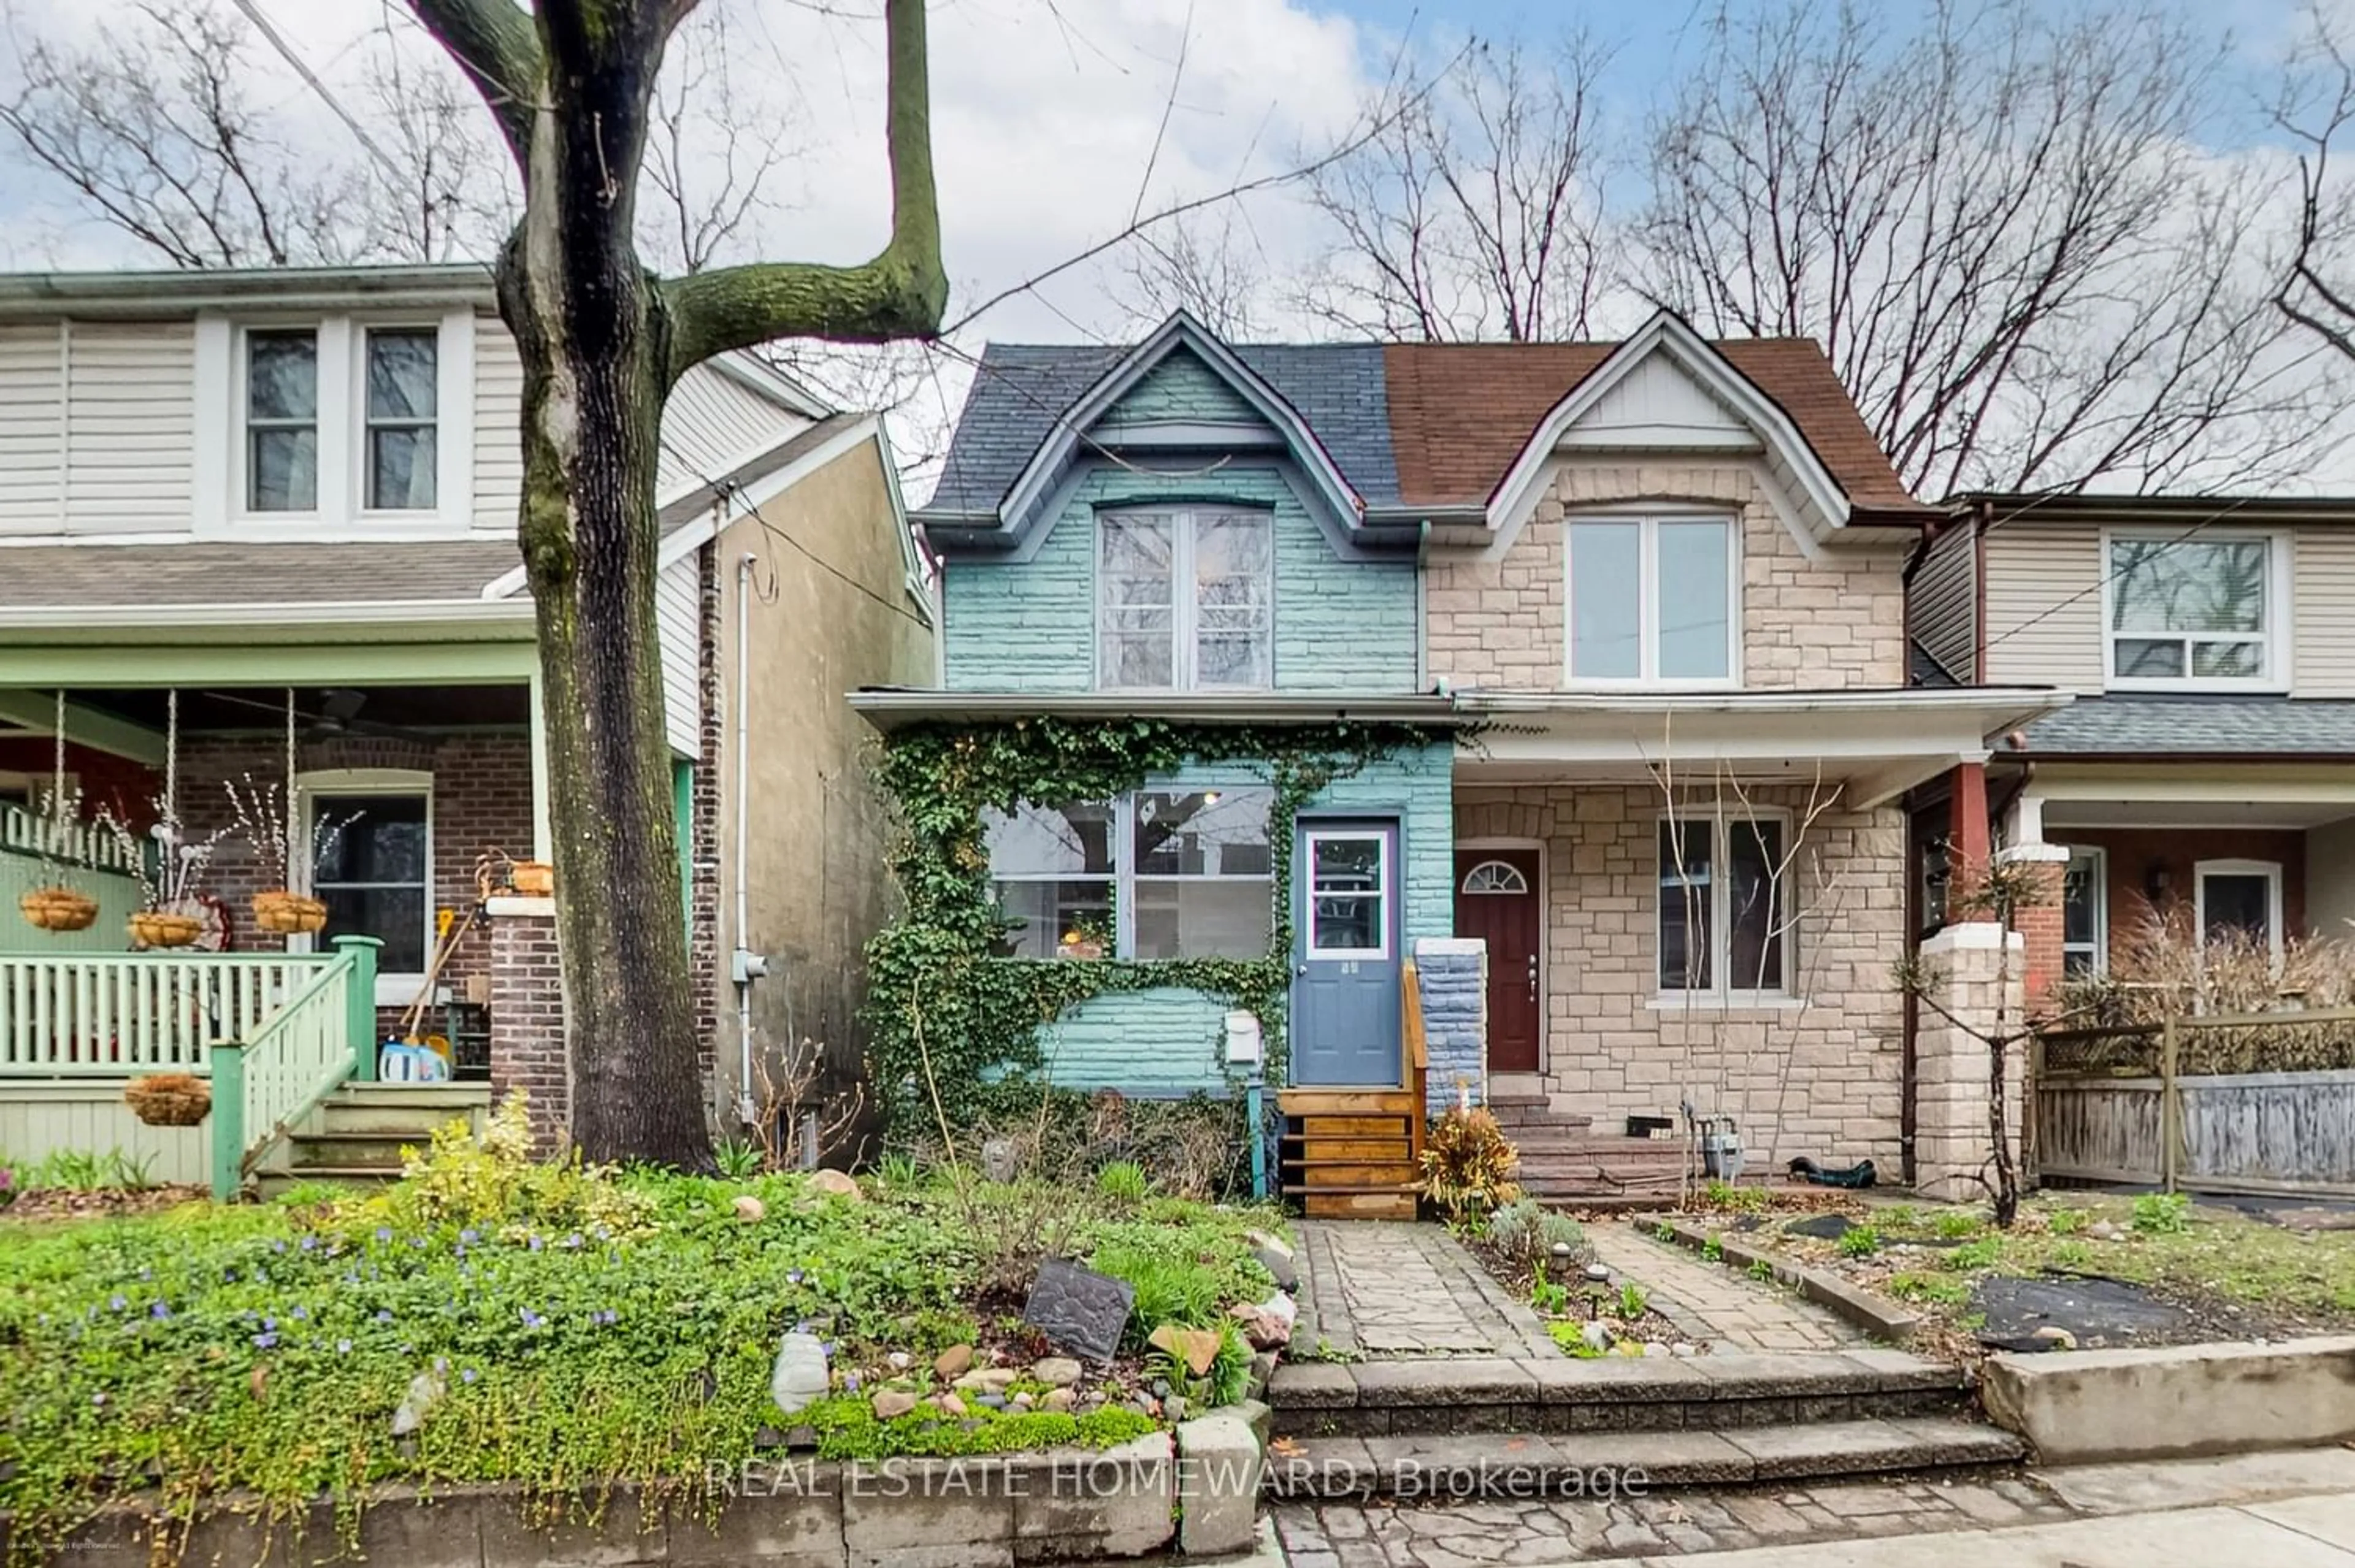 Frontside or backside of a home for 154 Oakcrest Ave, Toronto Ontario M4C 1C1